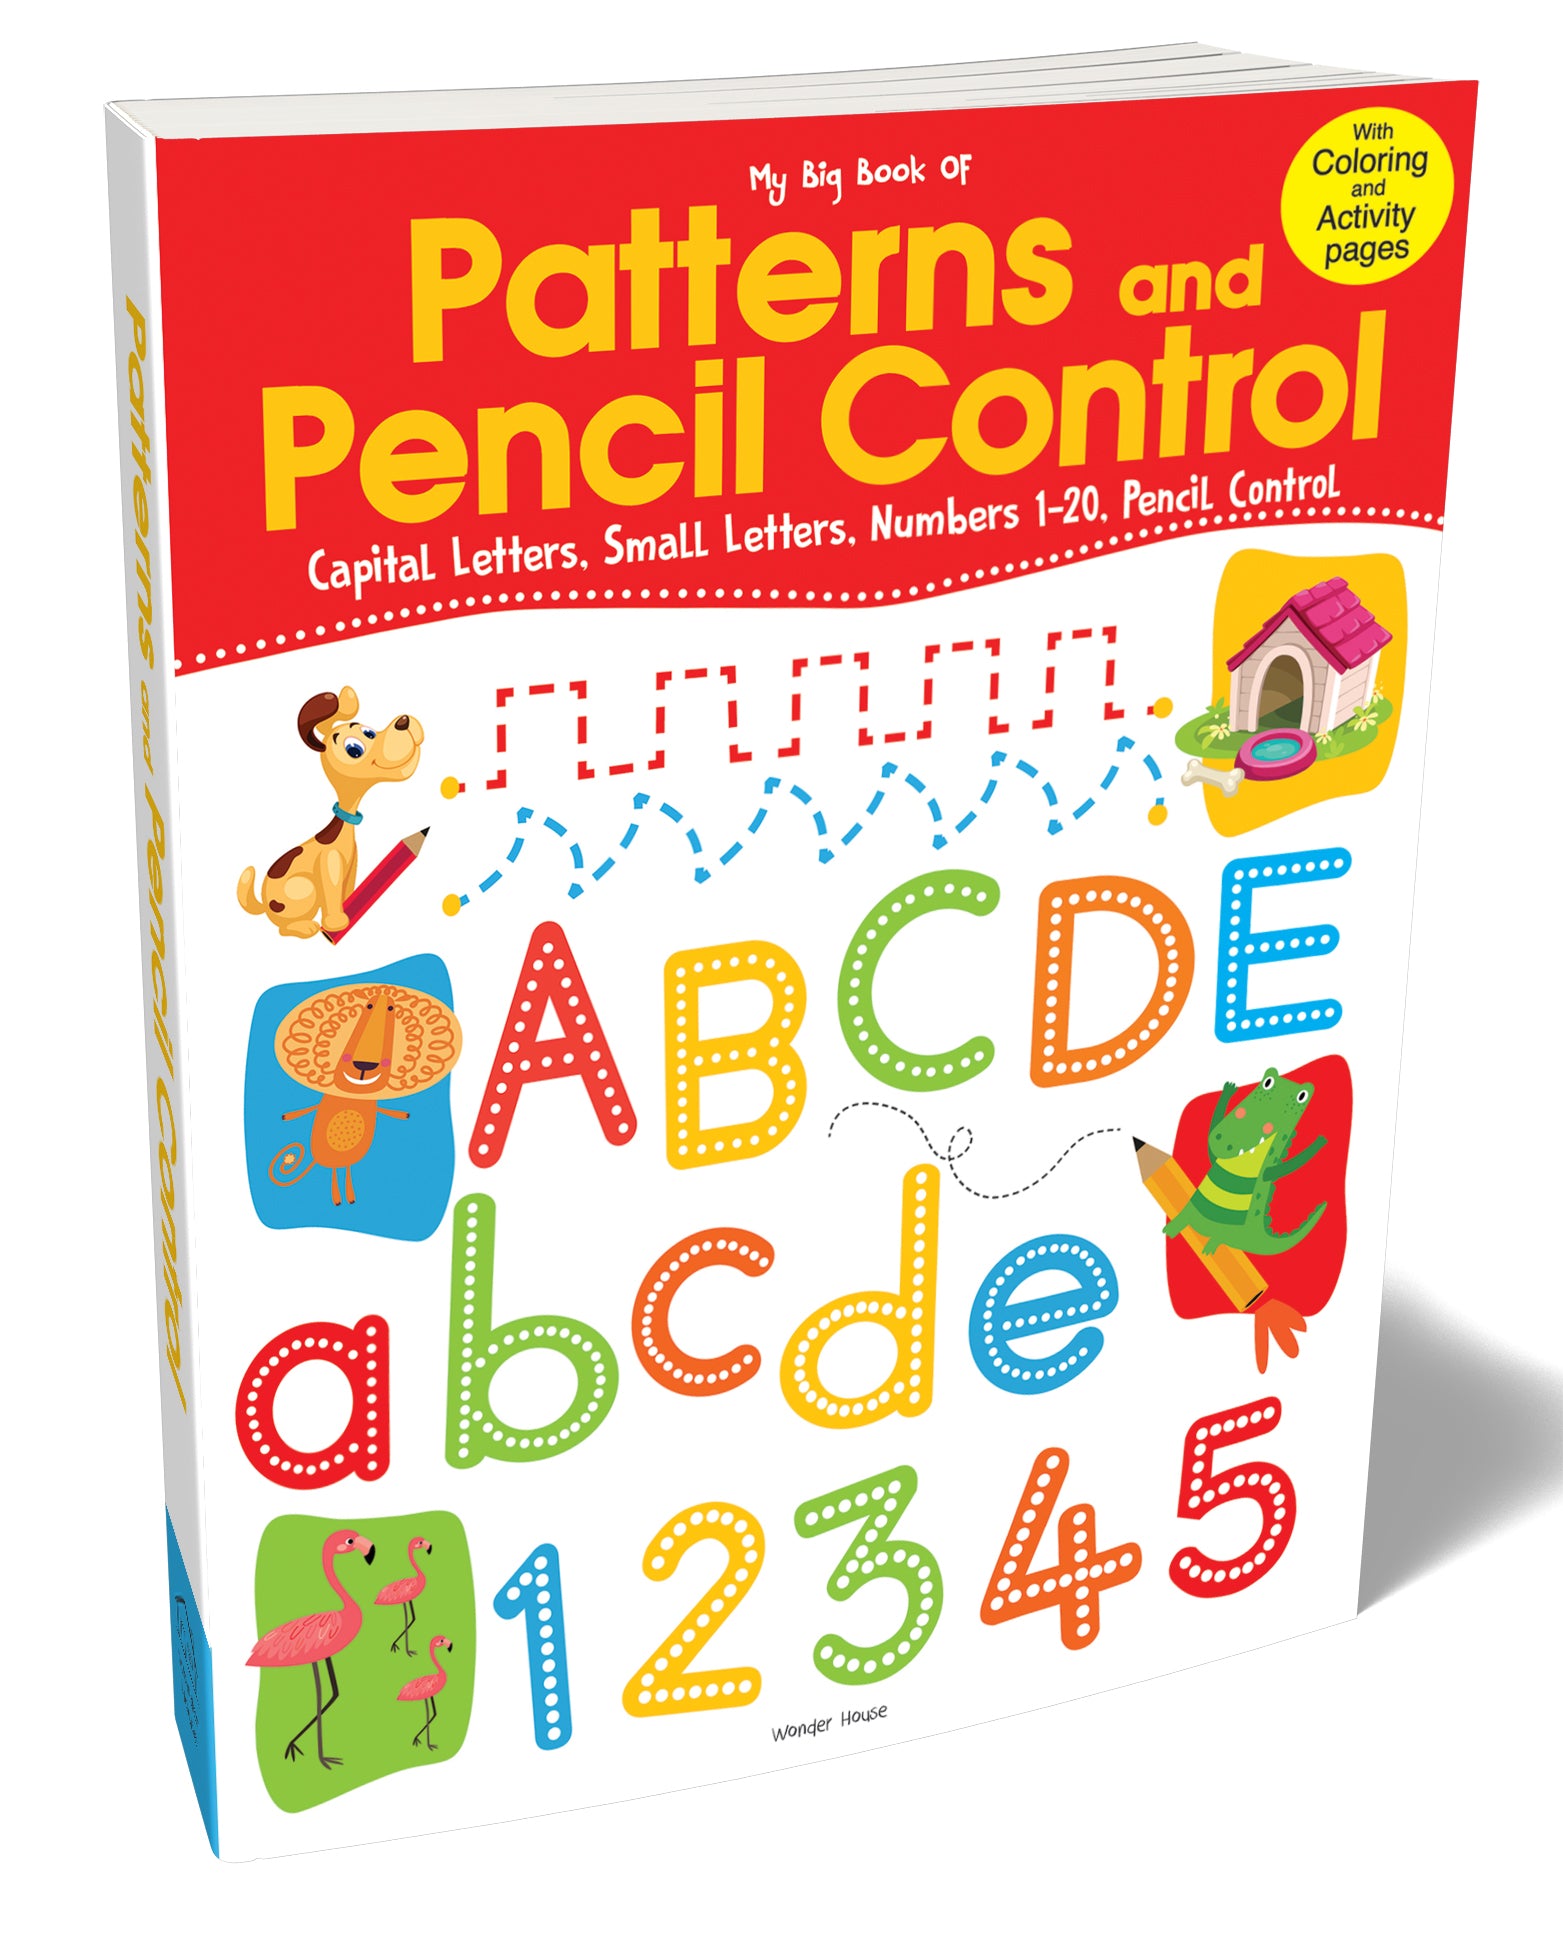 My Big Book of Patterns And Pencil Control : Interactive Activity Book For Children To Practice Patterns, Numbers 1-20 And Alphabet